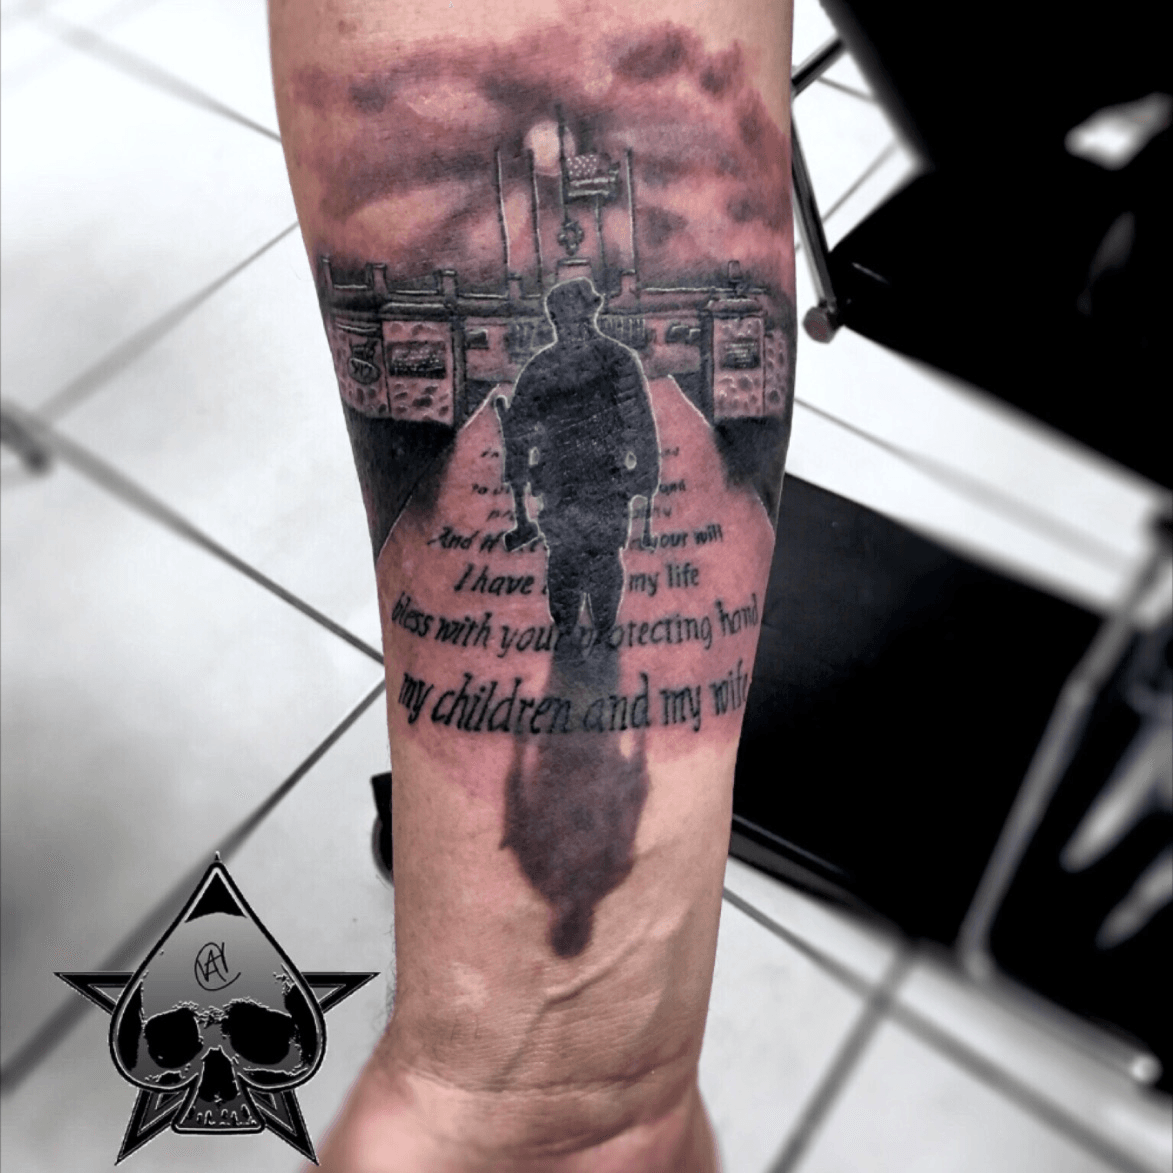 Tattoo uploaded by Angel Caban • Got to tattoo this cool Firefighter Prayer concept on Claytin today, thanks #guardianartgallery @guardianartgallery #fkirons #firefighter #prayer #blackandgrey #ct #tattoo #artist #fun • Tattoodo